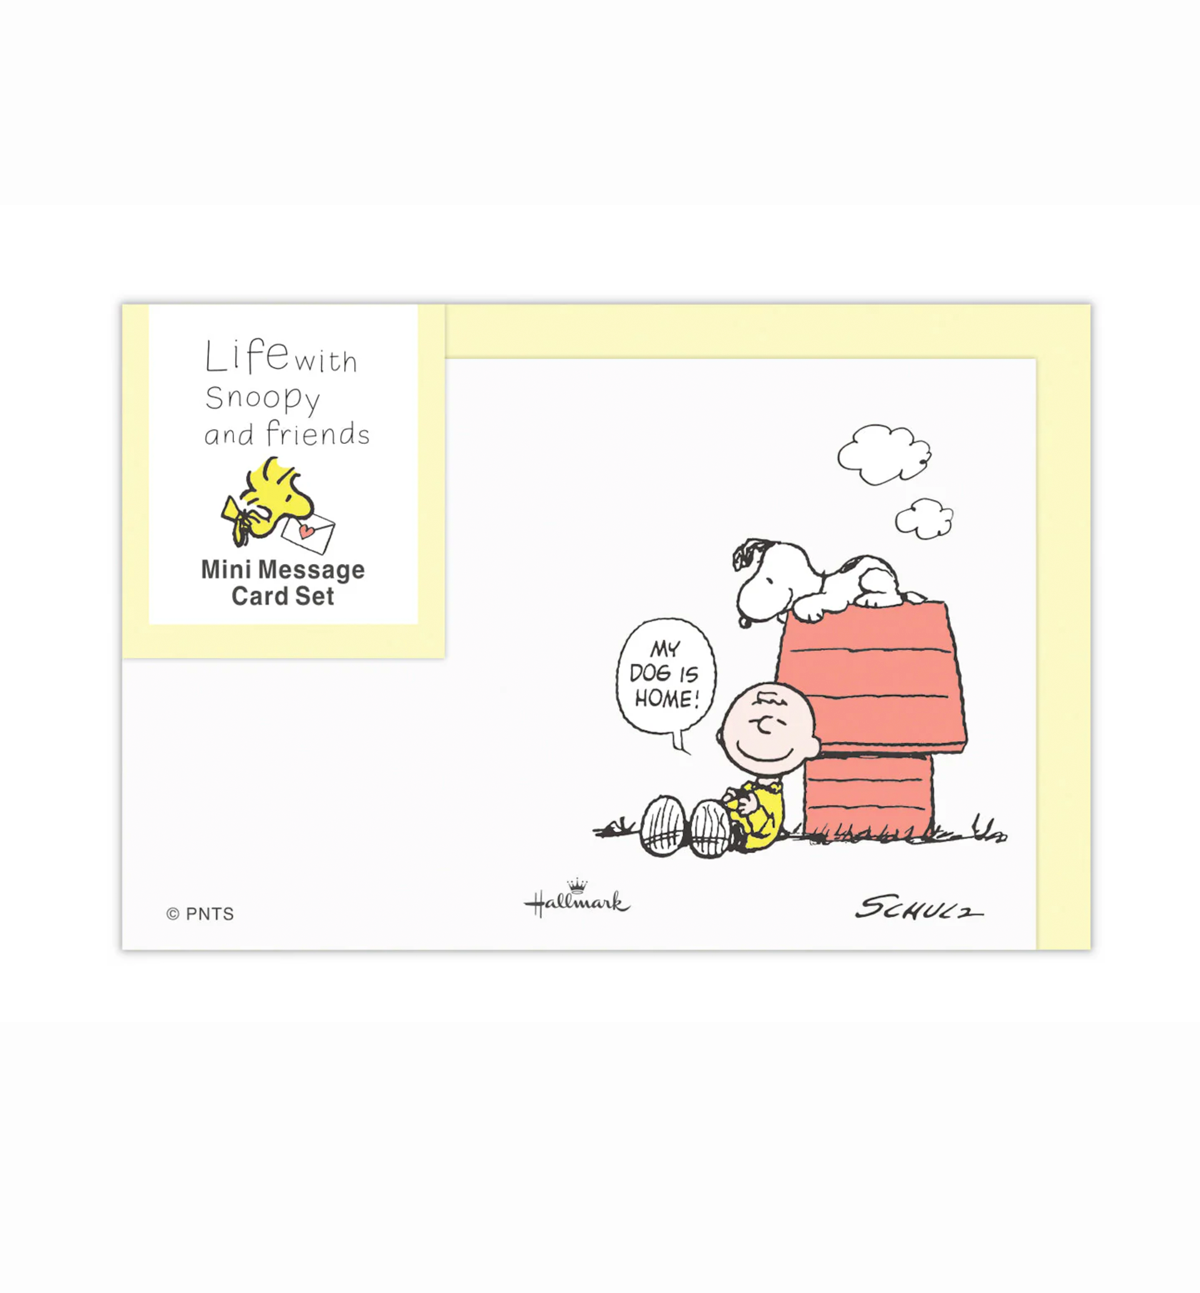 Life With Snoopy & Friends Mini Message Card Set [Yellow]